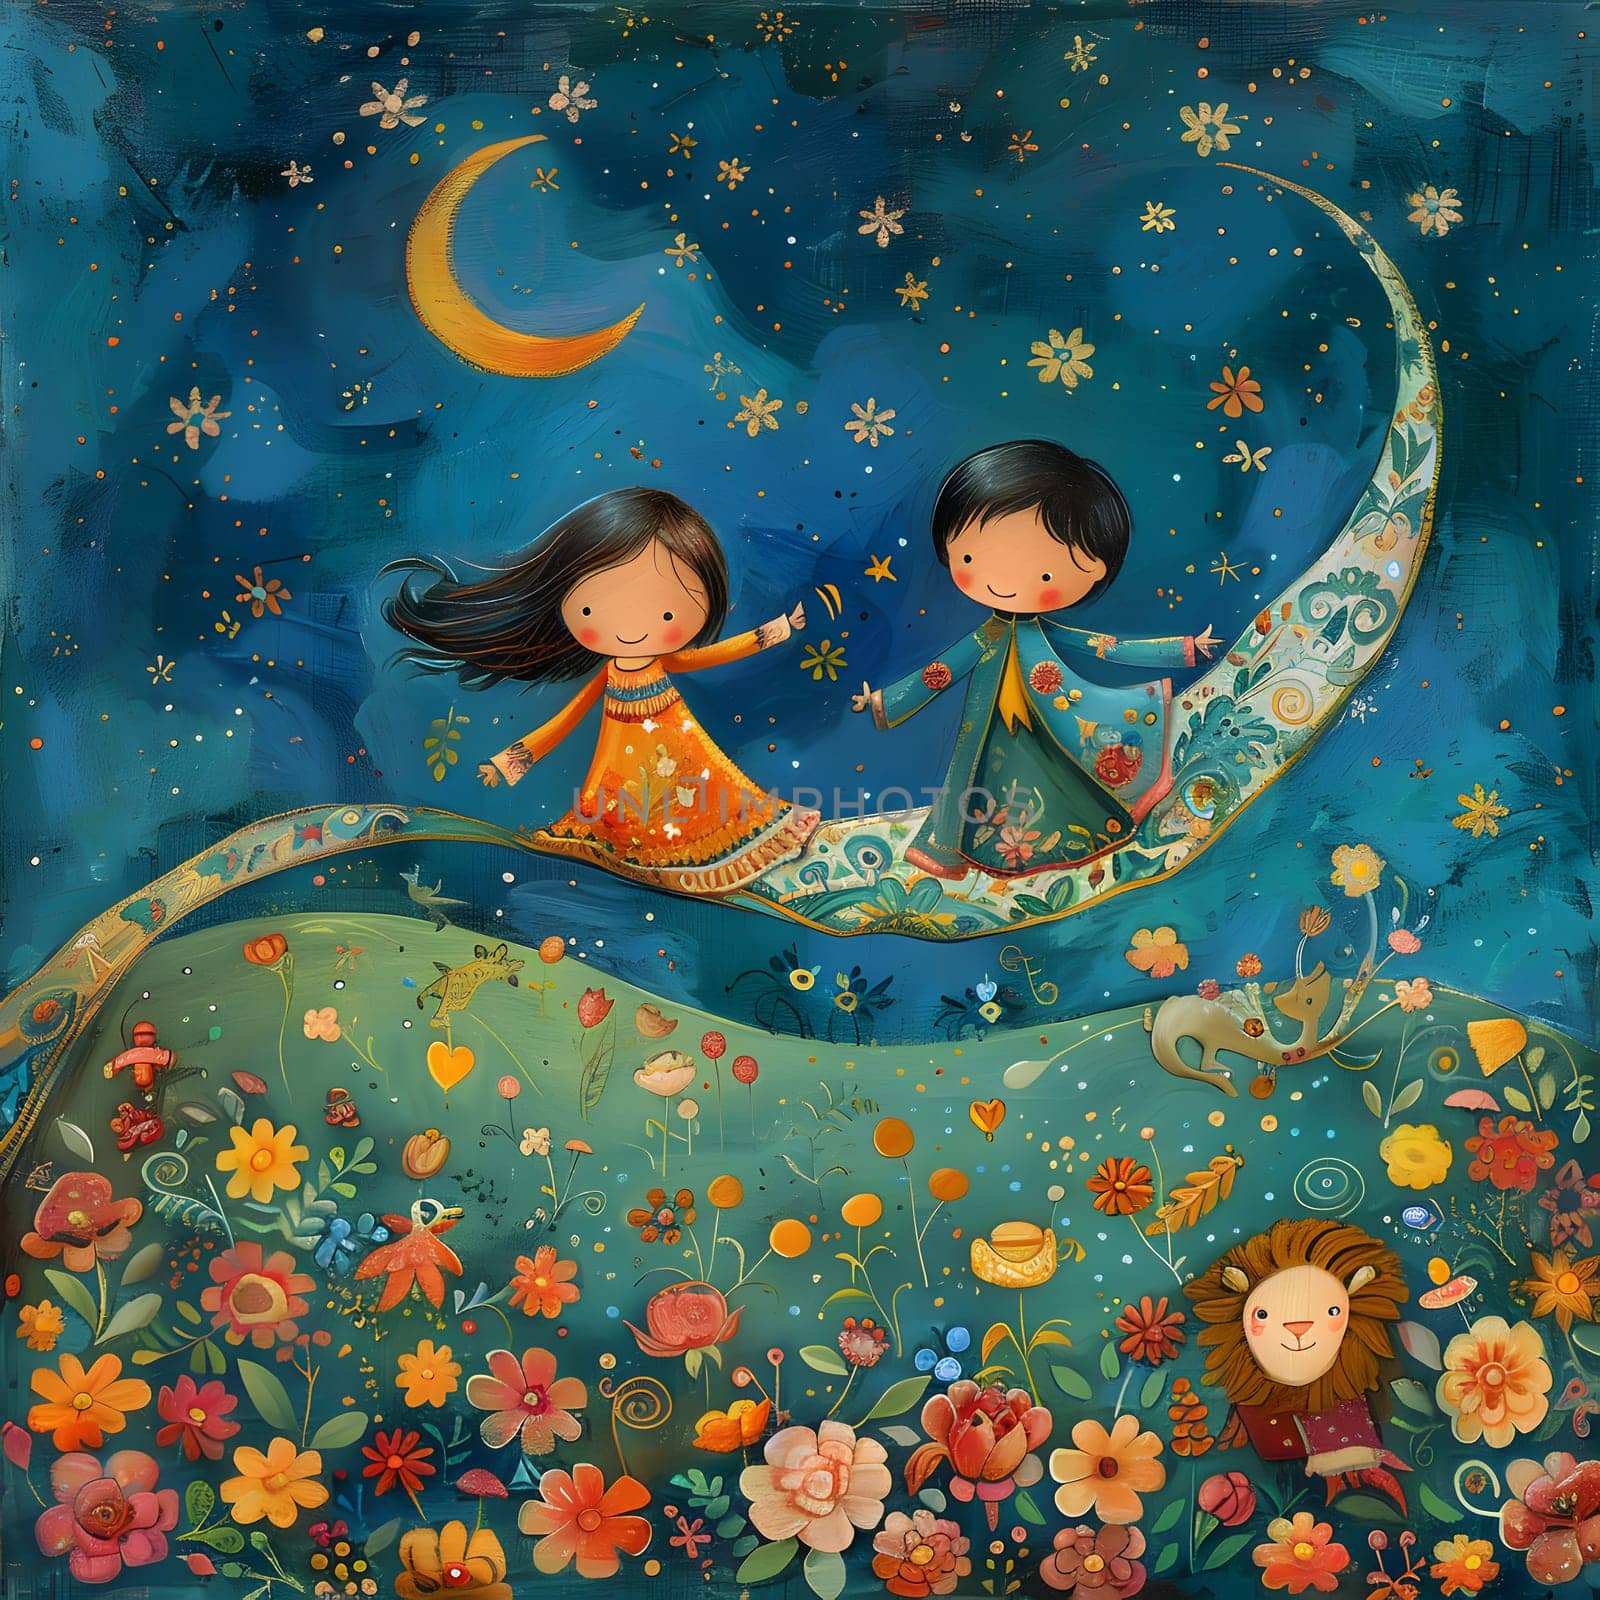 An artistic representation of a boy and a girl flying on a crescent moon in azure skies. Surrounding them are vibrant flowers and aquatic organisms